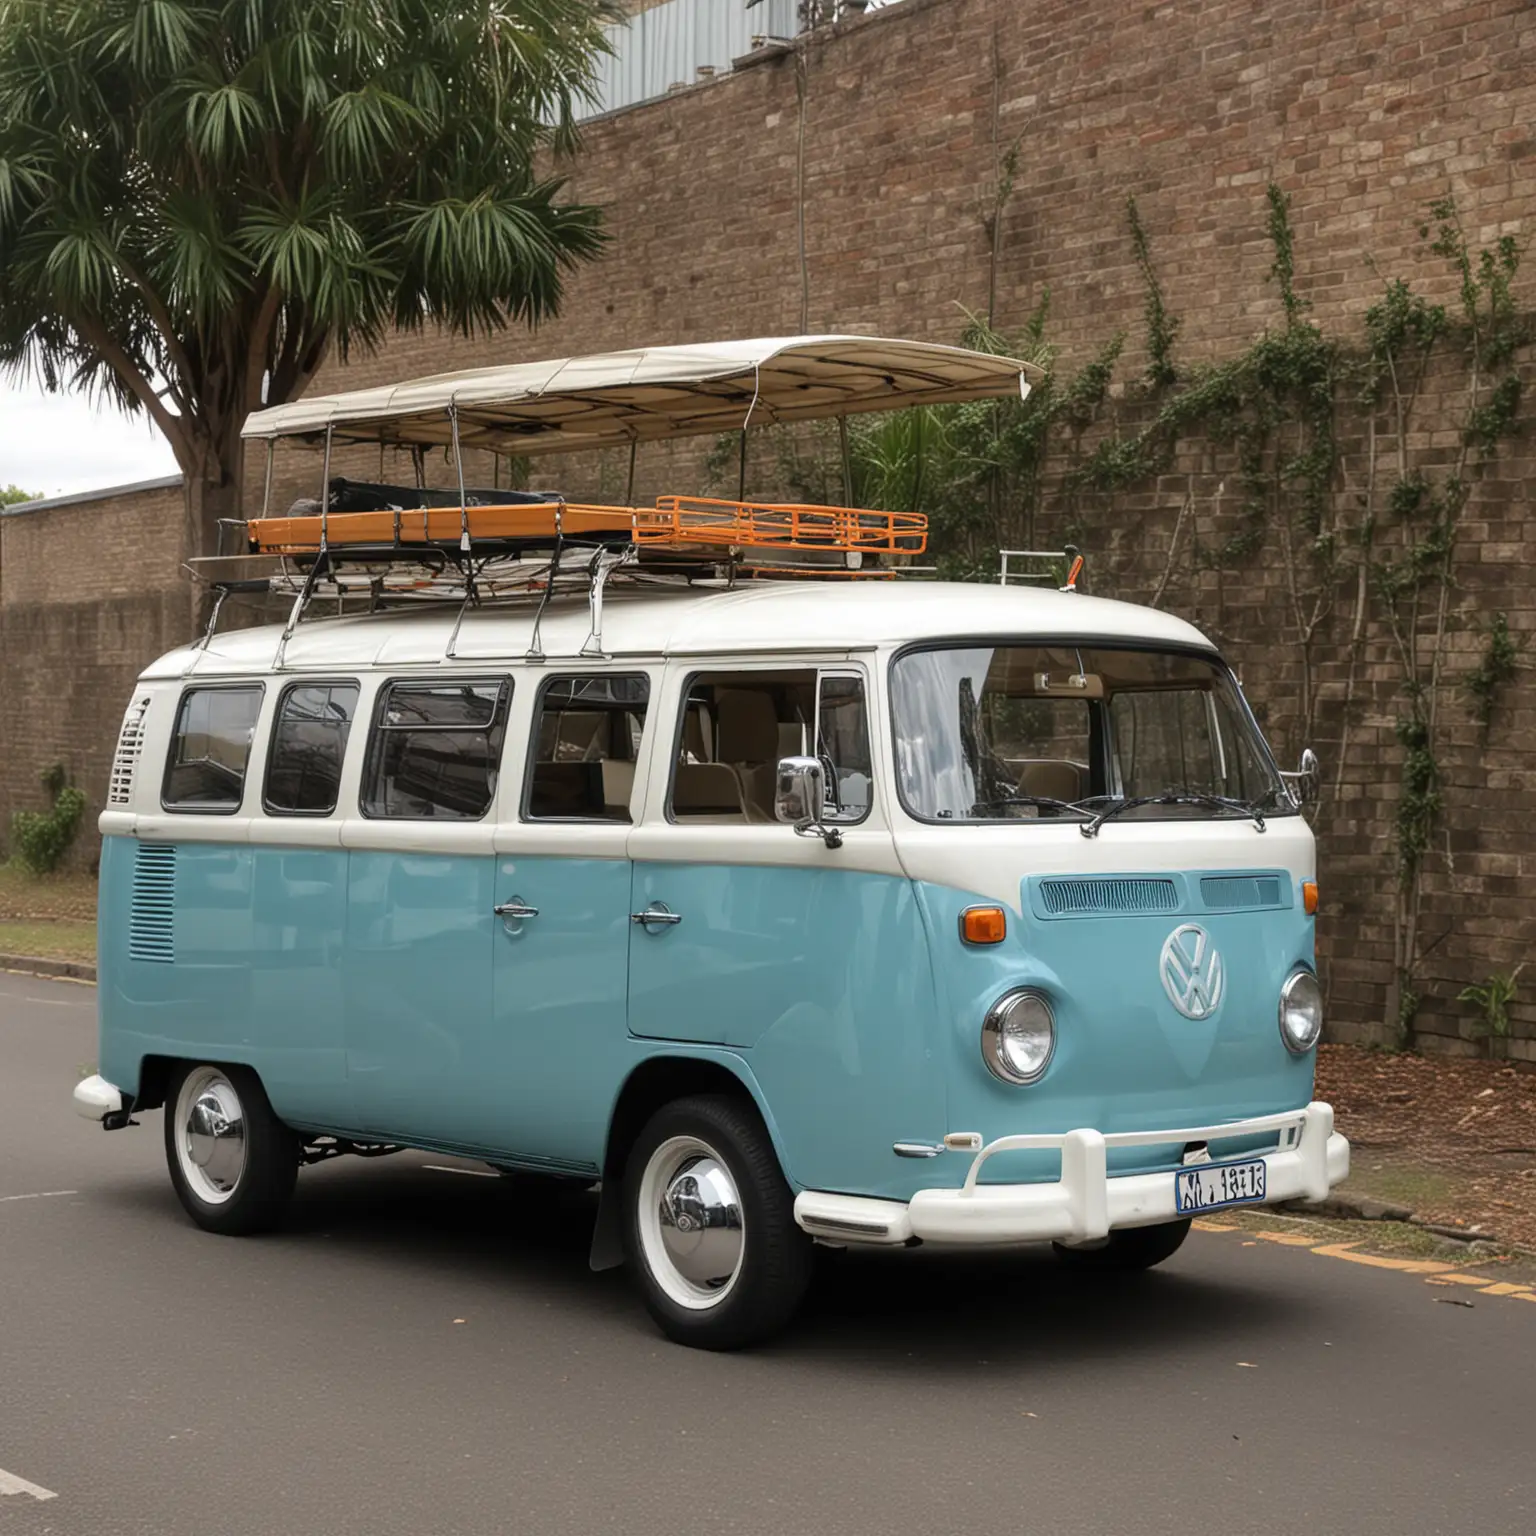 now create a picture of this kombi fully restored
